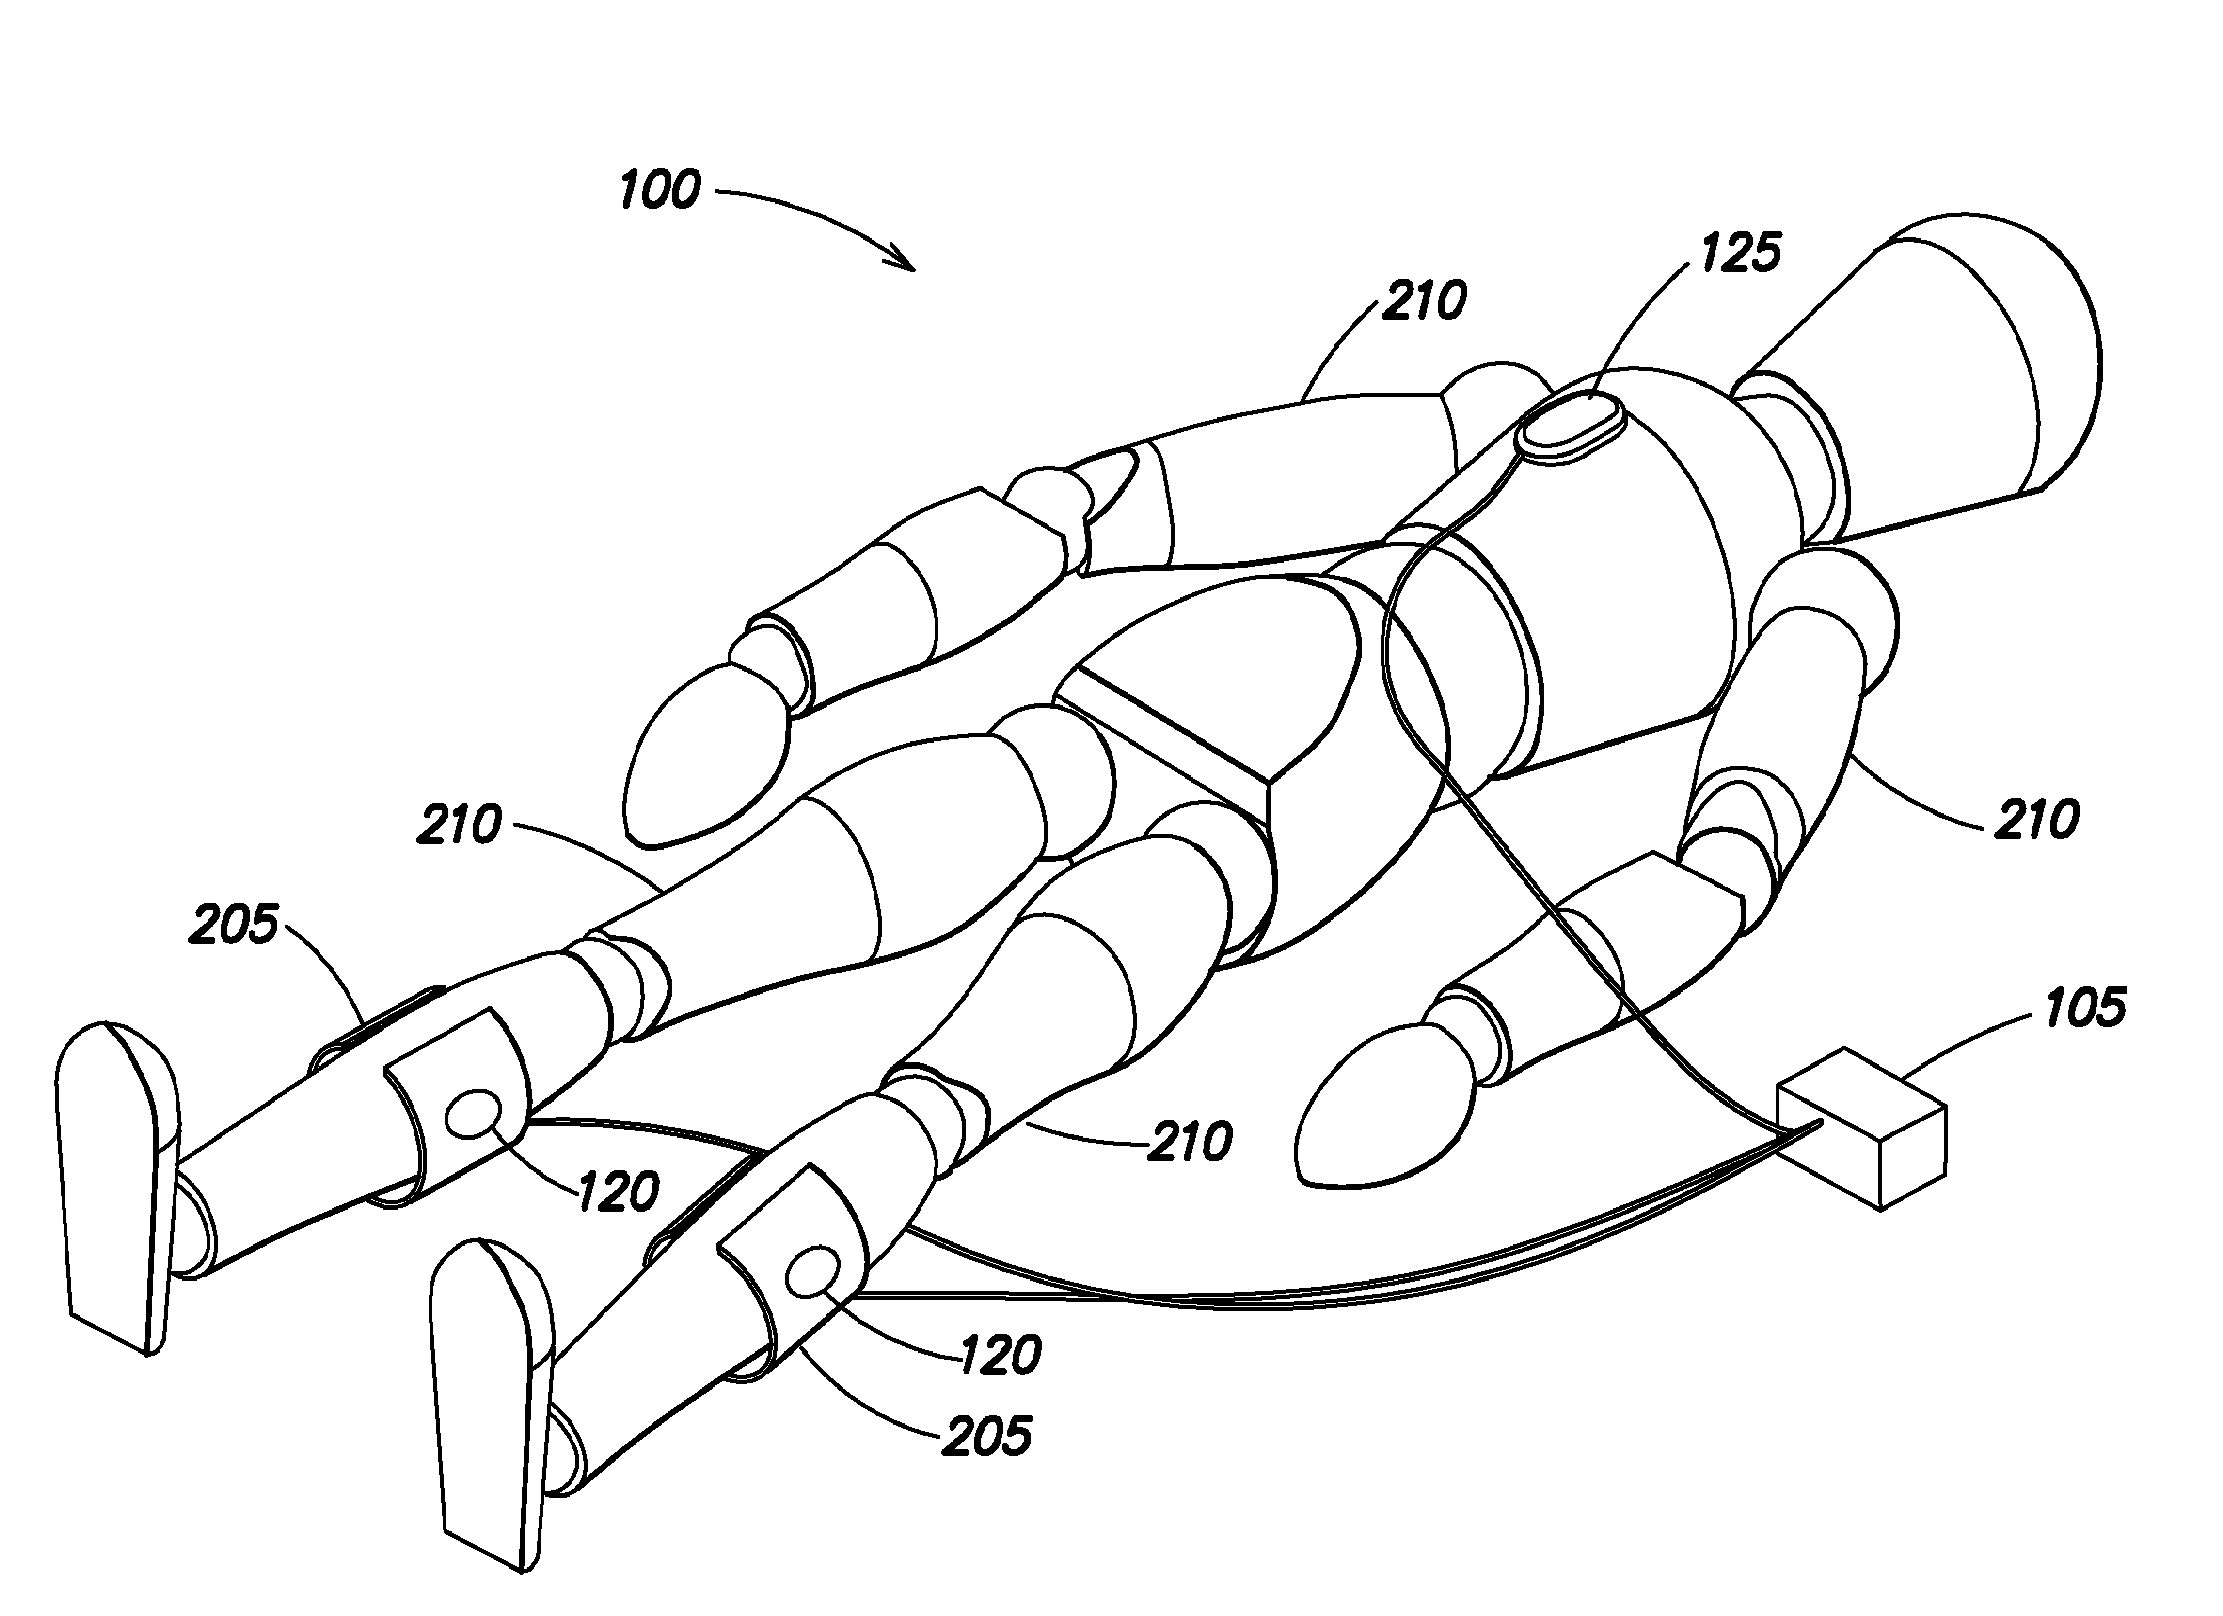 Systems and methods for enhanced venous return flow during cardiac event